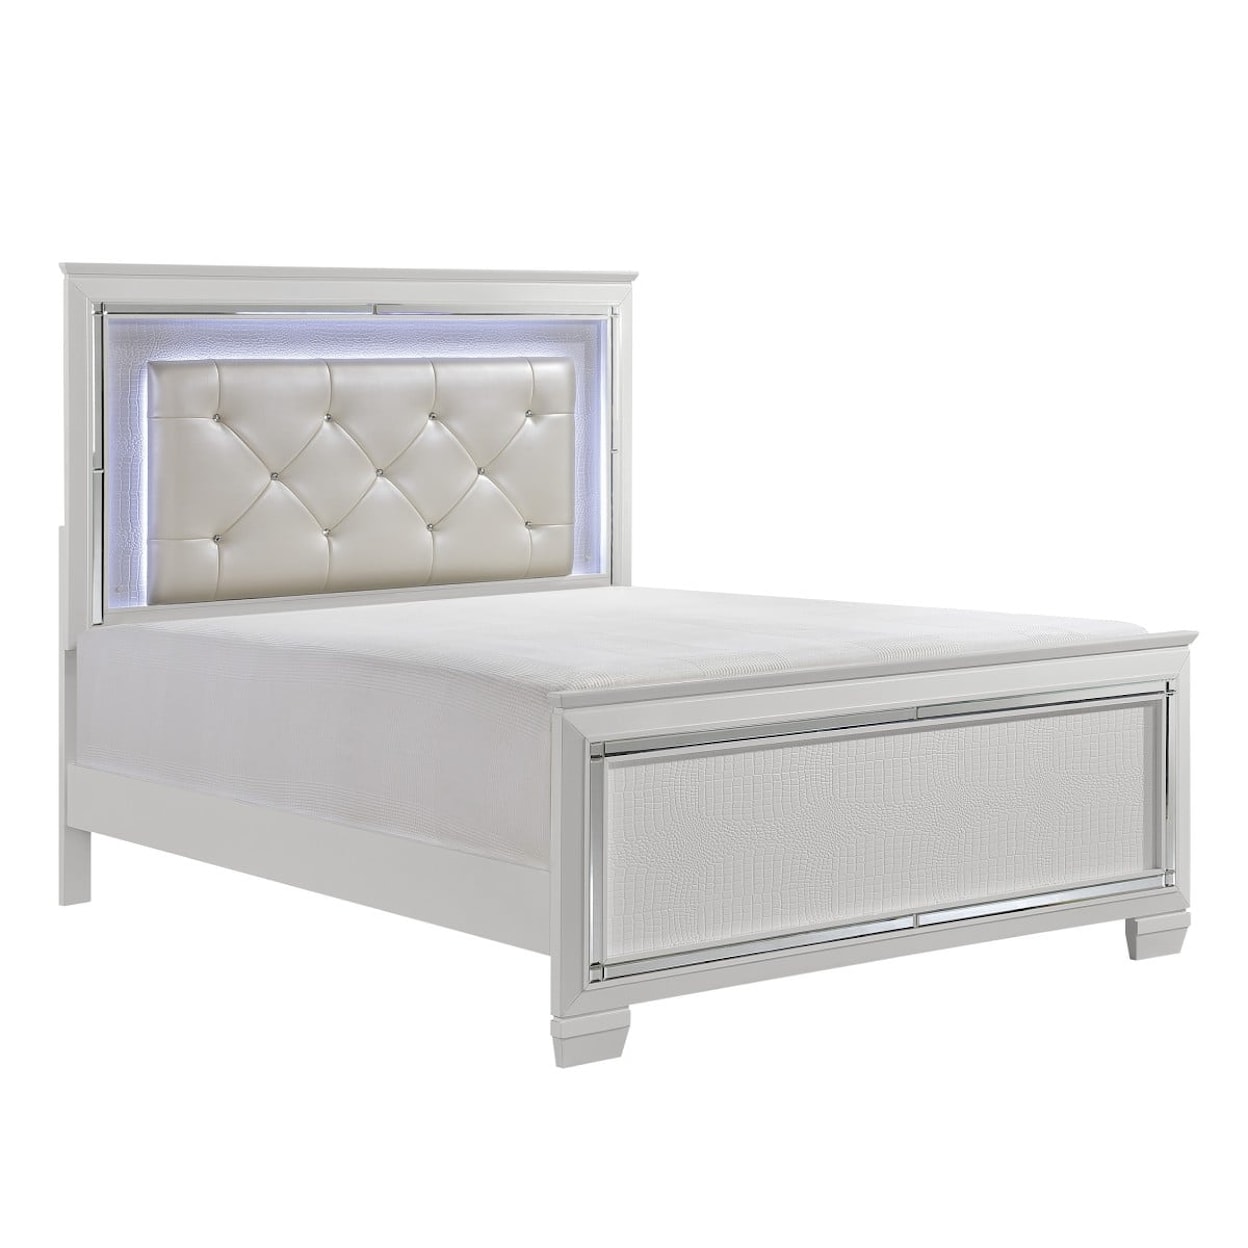 Homelegance Allura Queen Bed with Led Lighting